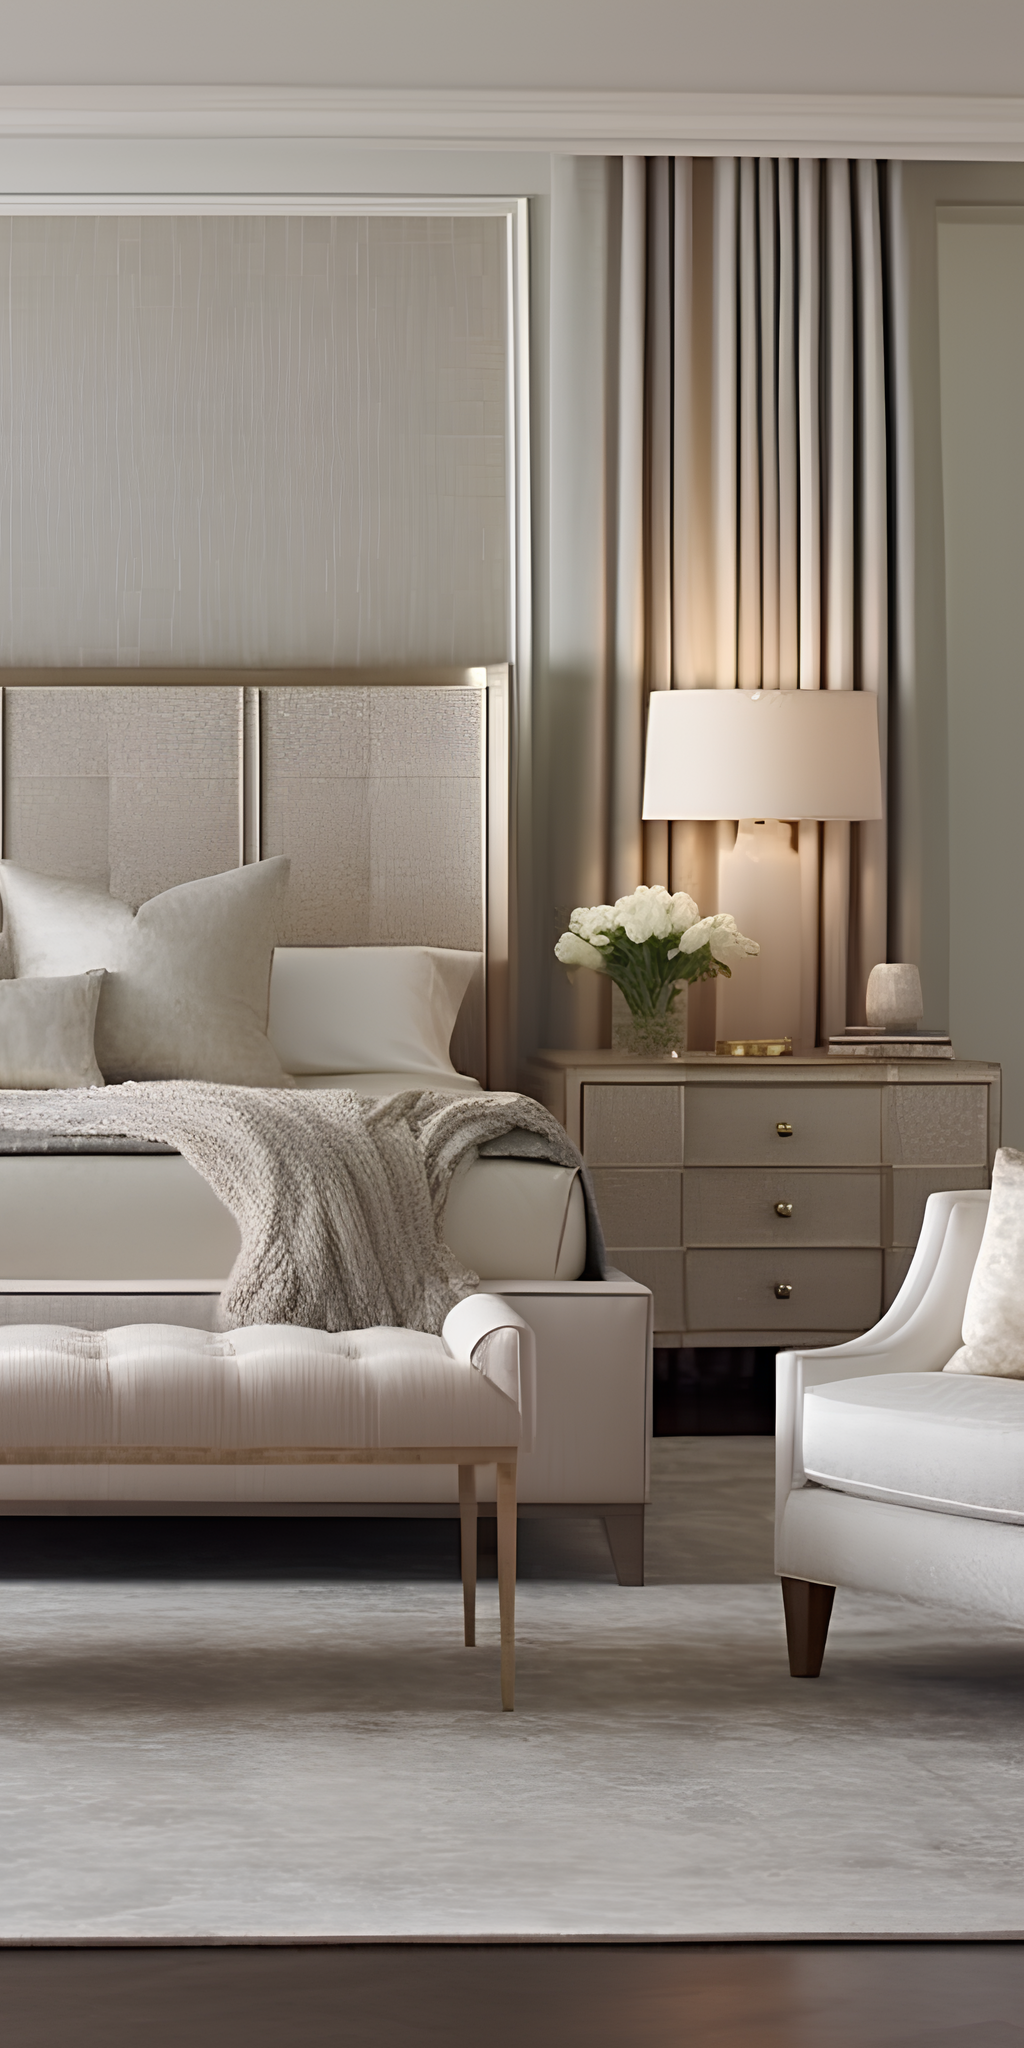 Complete Bedroom Furnishing: A Set for
Your Sleep Sanctuary